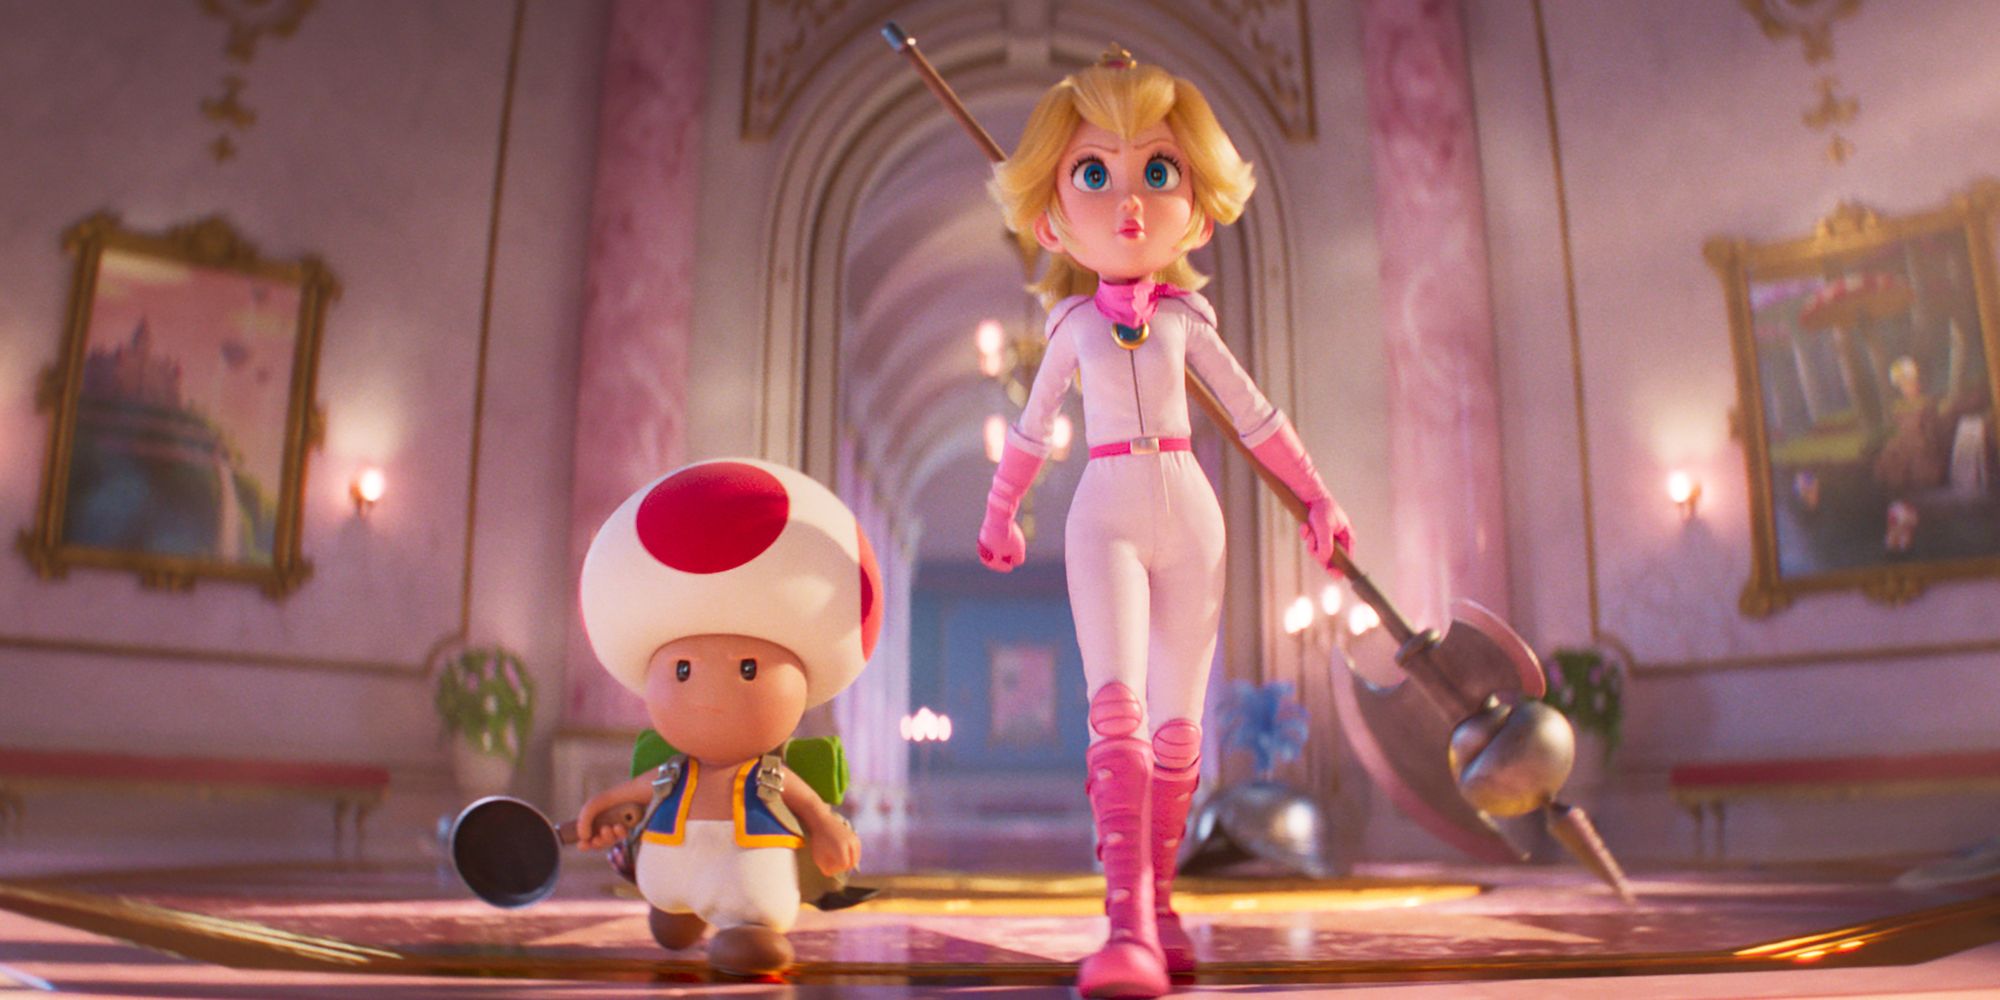 super mario bros. movie princess peach and toad going into battle